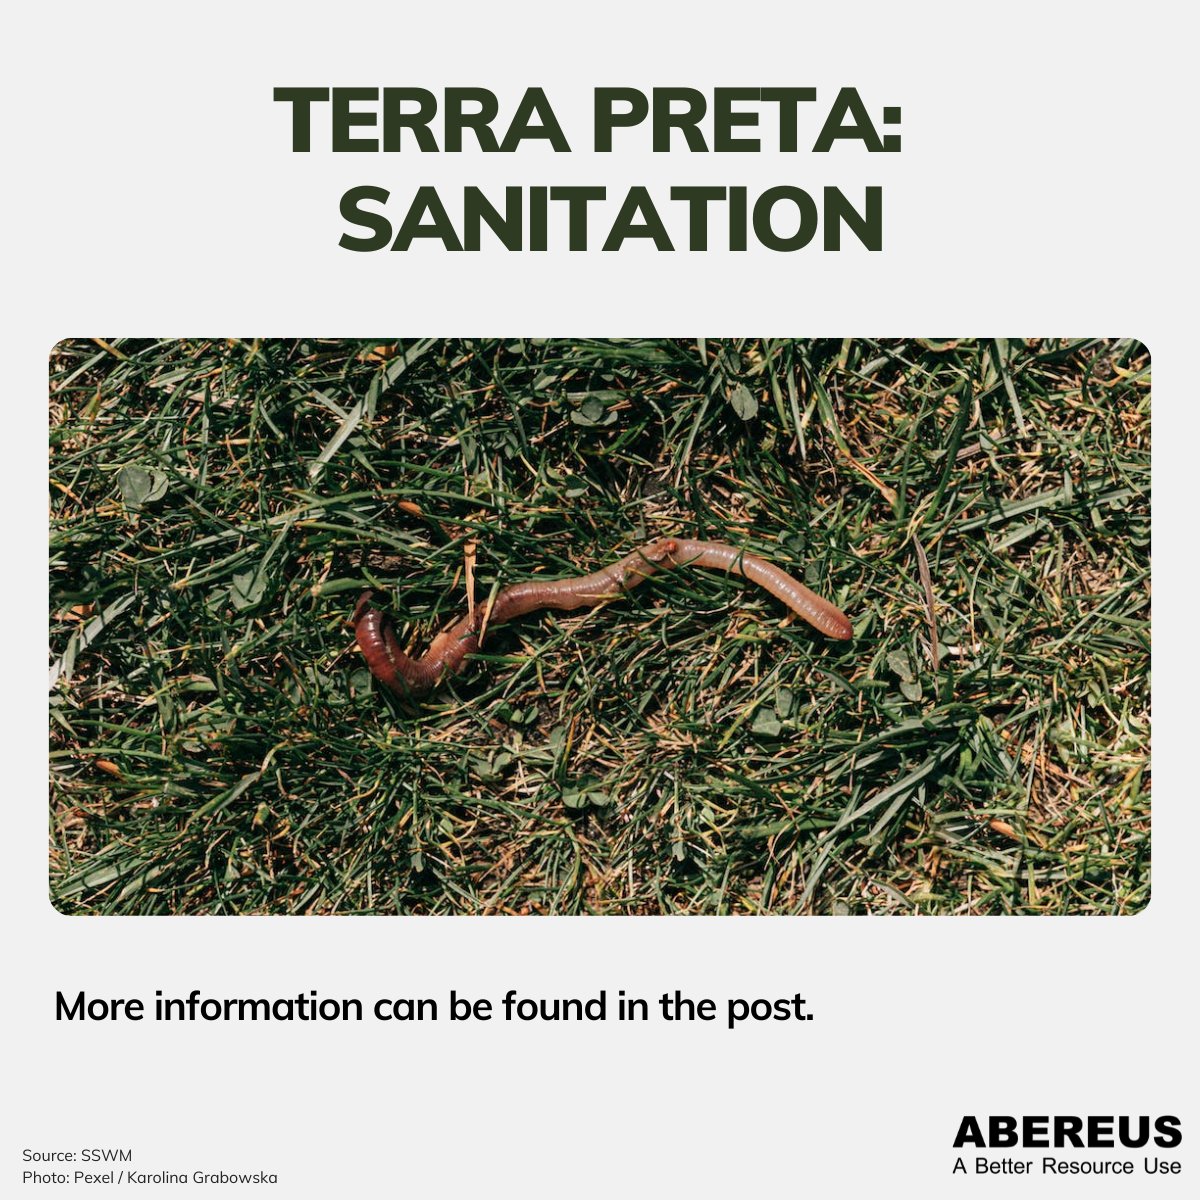 Last week, we talked about the #nutrient-rich soil called #TerraPreta. It’s a human-made soil which has great advantages for #agriculture and can #help combat #climatechange because it stores #carbon.

An interesting side topic for us is Terra Preta #sanitation, where
1/8